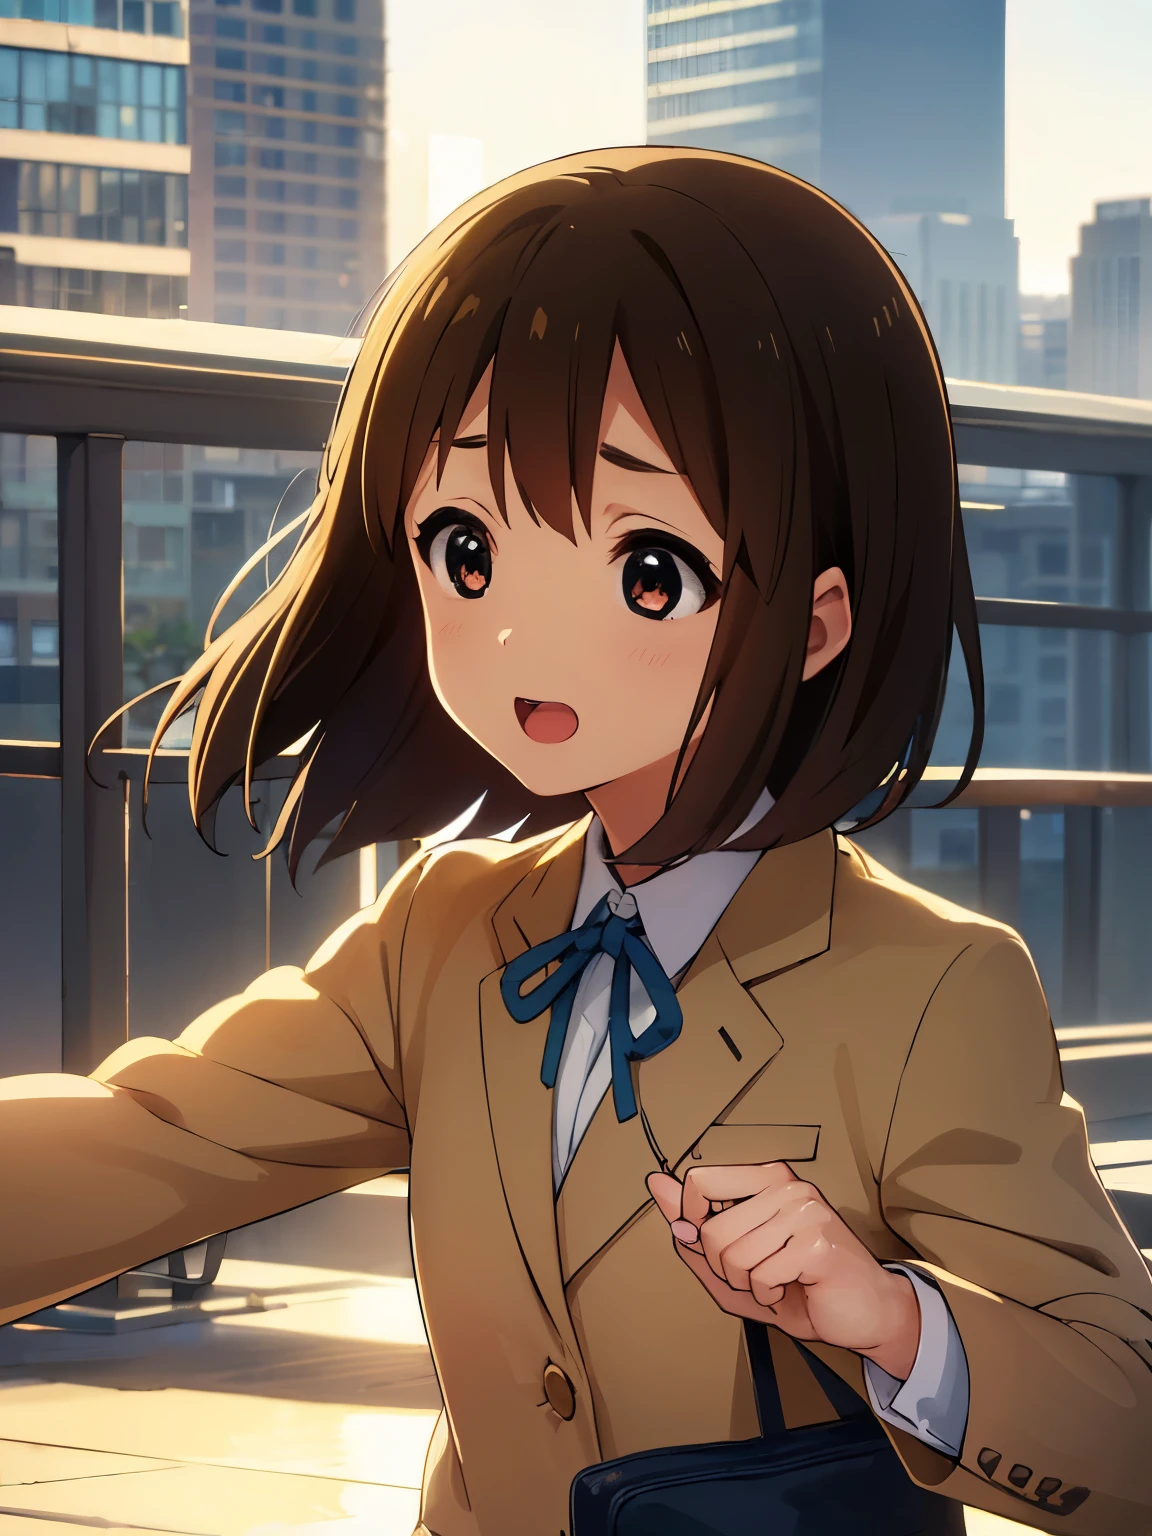 1girl, (((masterpiece))), top-quality, top-quality, High Details, hirasawa yui, 1girl, Sakuragaoka High , student clothes, short hair, A brown-haired, brown-eyed, solo, reddish, Dark blue blazer with thin blue ribbon, Solid white buttoned shirt under blazer, illustratio, comic strip, soothing tones, Subdued Color, Soft cinematic light, adobe lightroom, photolab, HDR, intricately and hyper-detailed、(((depth of fieldasterpiece)))。(((top-quality))).)((Ultra-detail)))。(((illustratio)))。(((takeout))).dynamic focus.big breasts.(((Skyscrapers))).(((A city scape))).(((Face of happiness))). open mouth.(((fighting stance))).(((up chest))).((afternoon glow)).((the setting sun)).